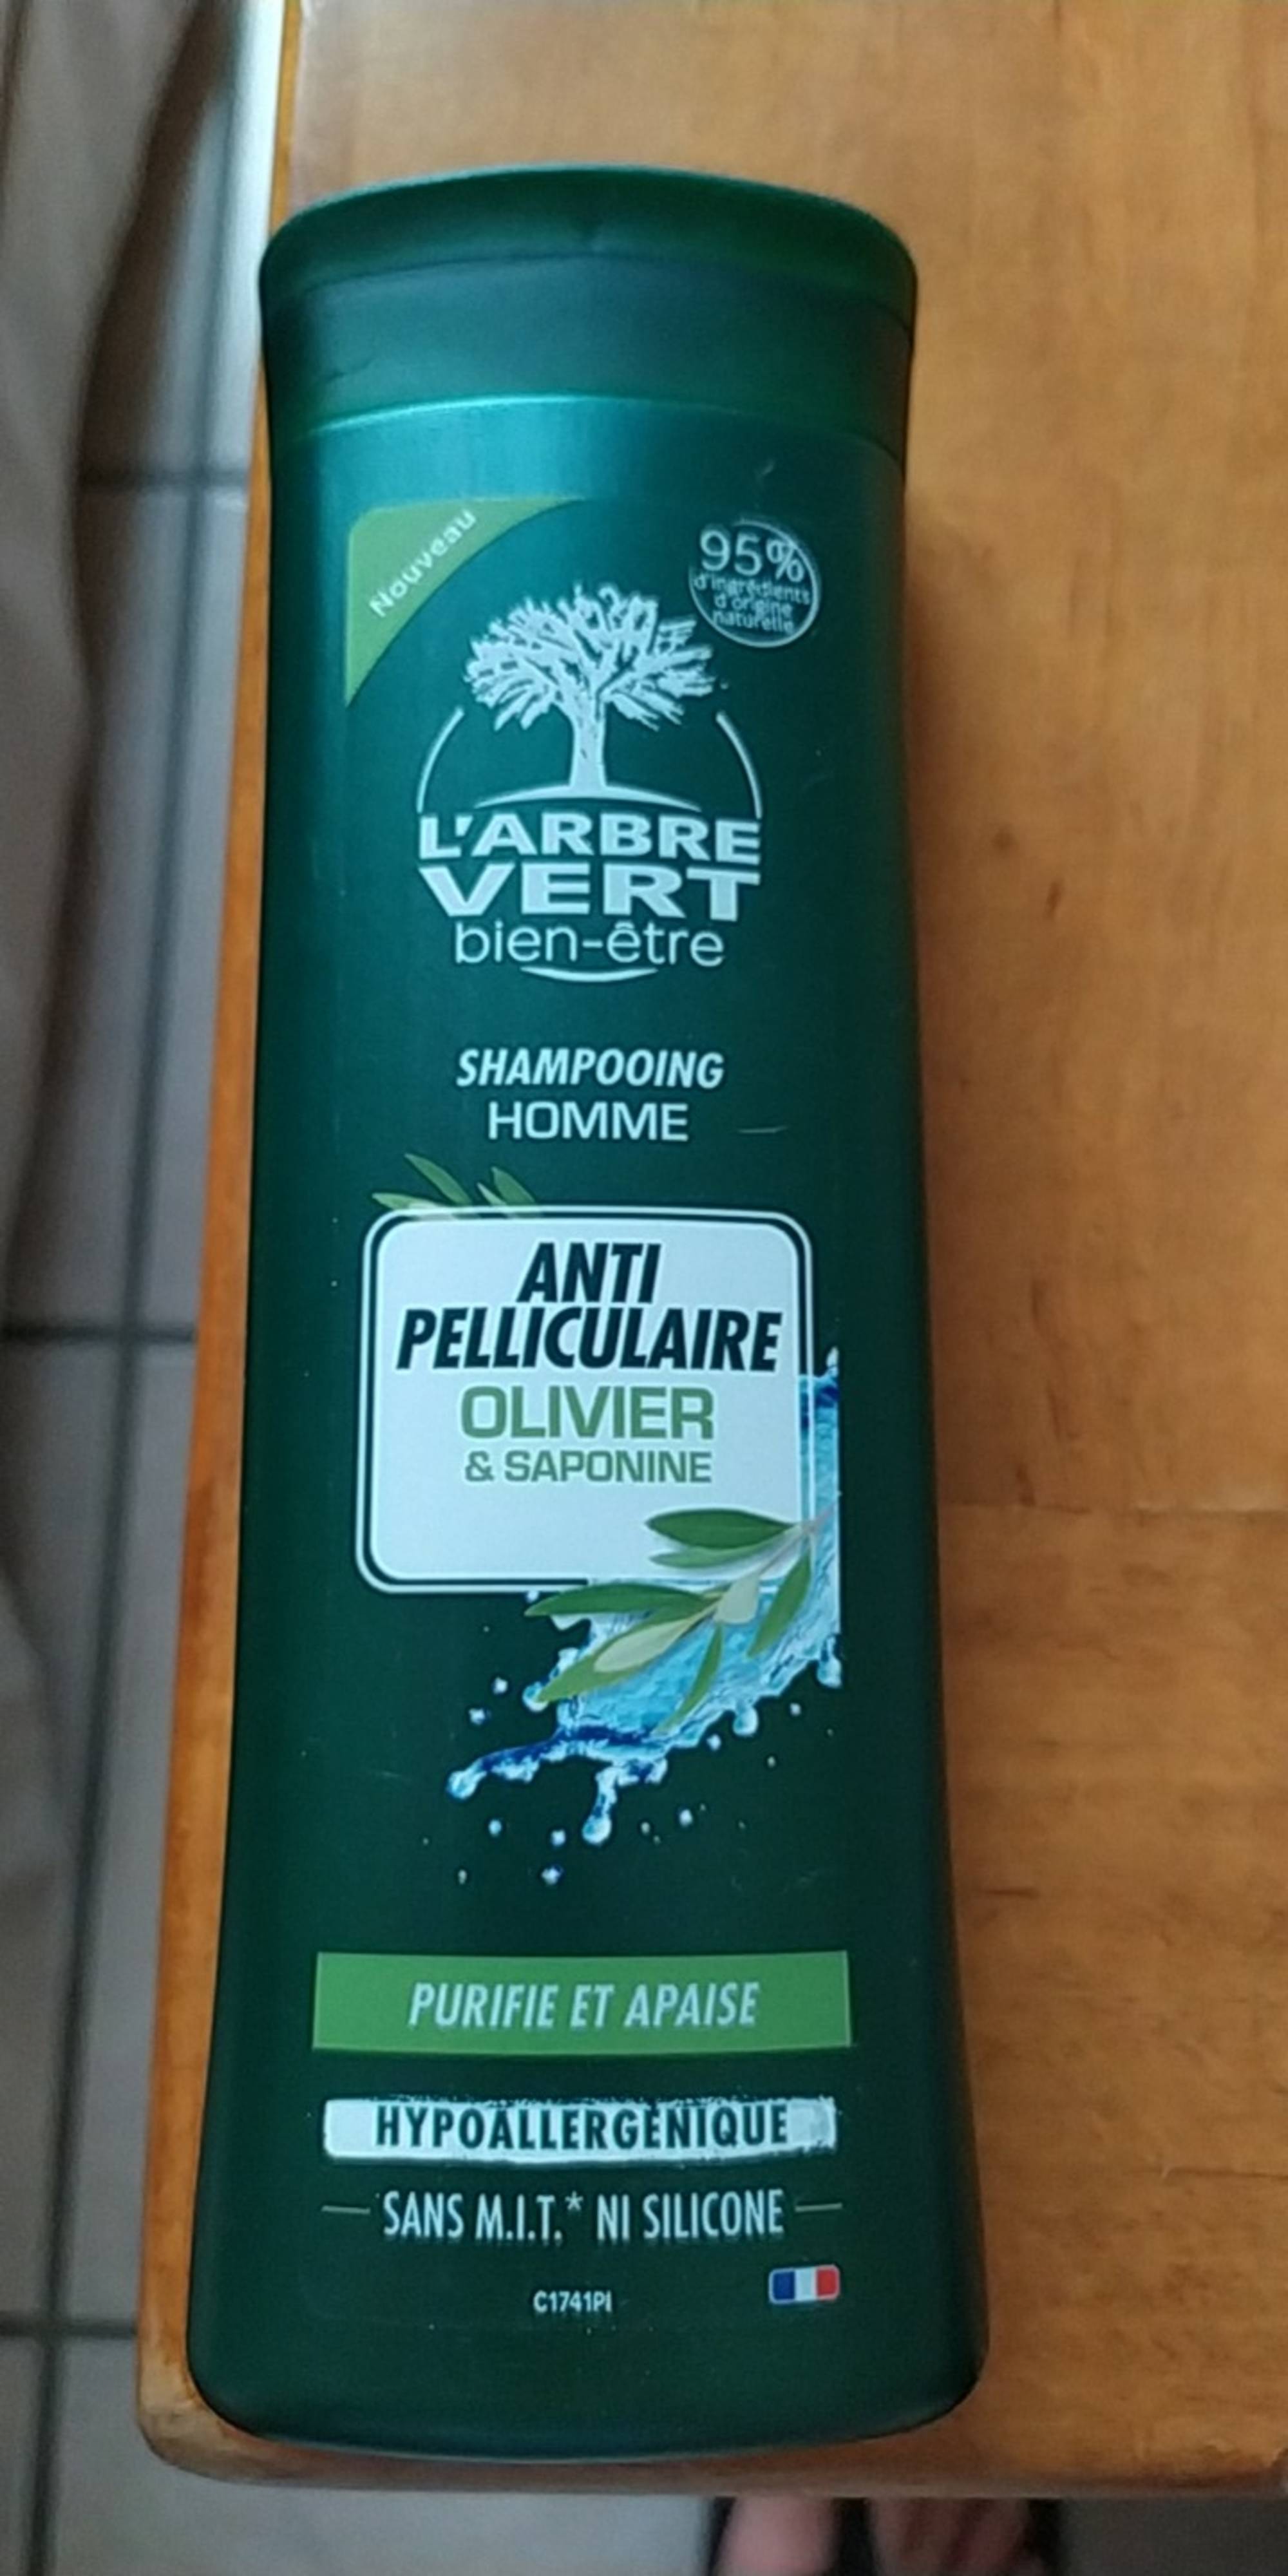 L'ARBRE VERT - Anti-pelliculaire  Olivier & Saponine - Shampooing homme